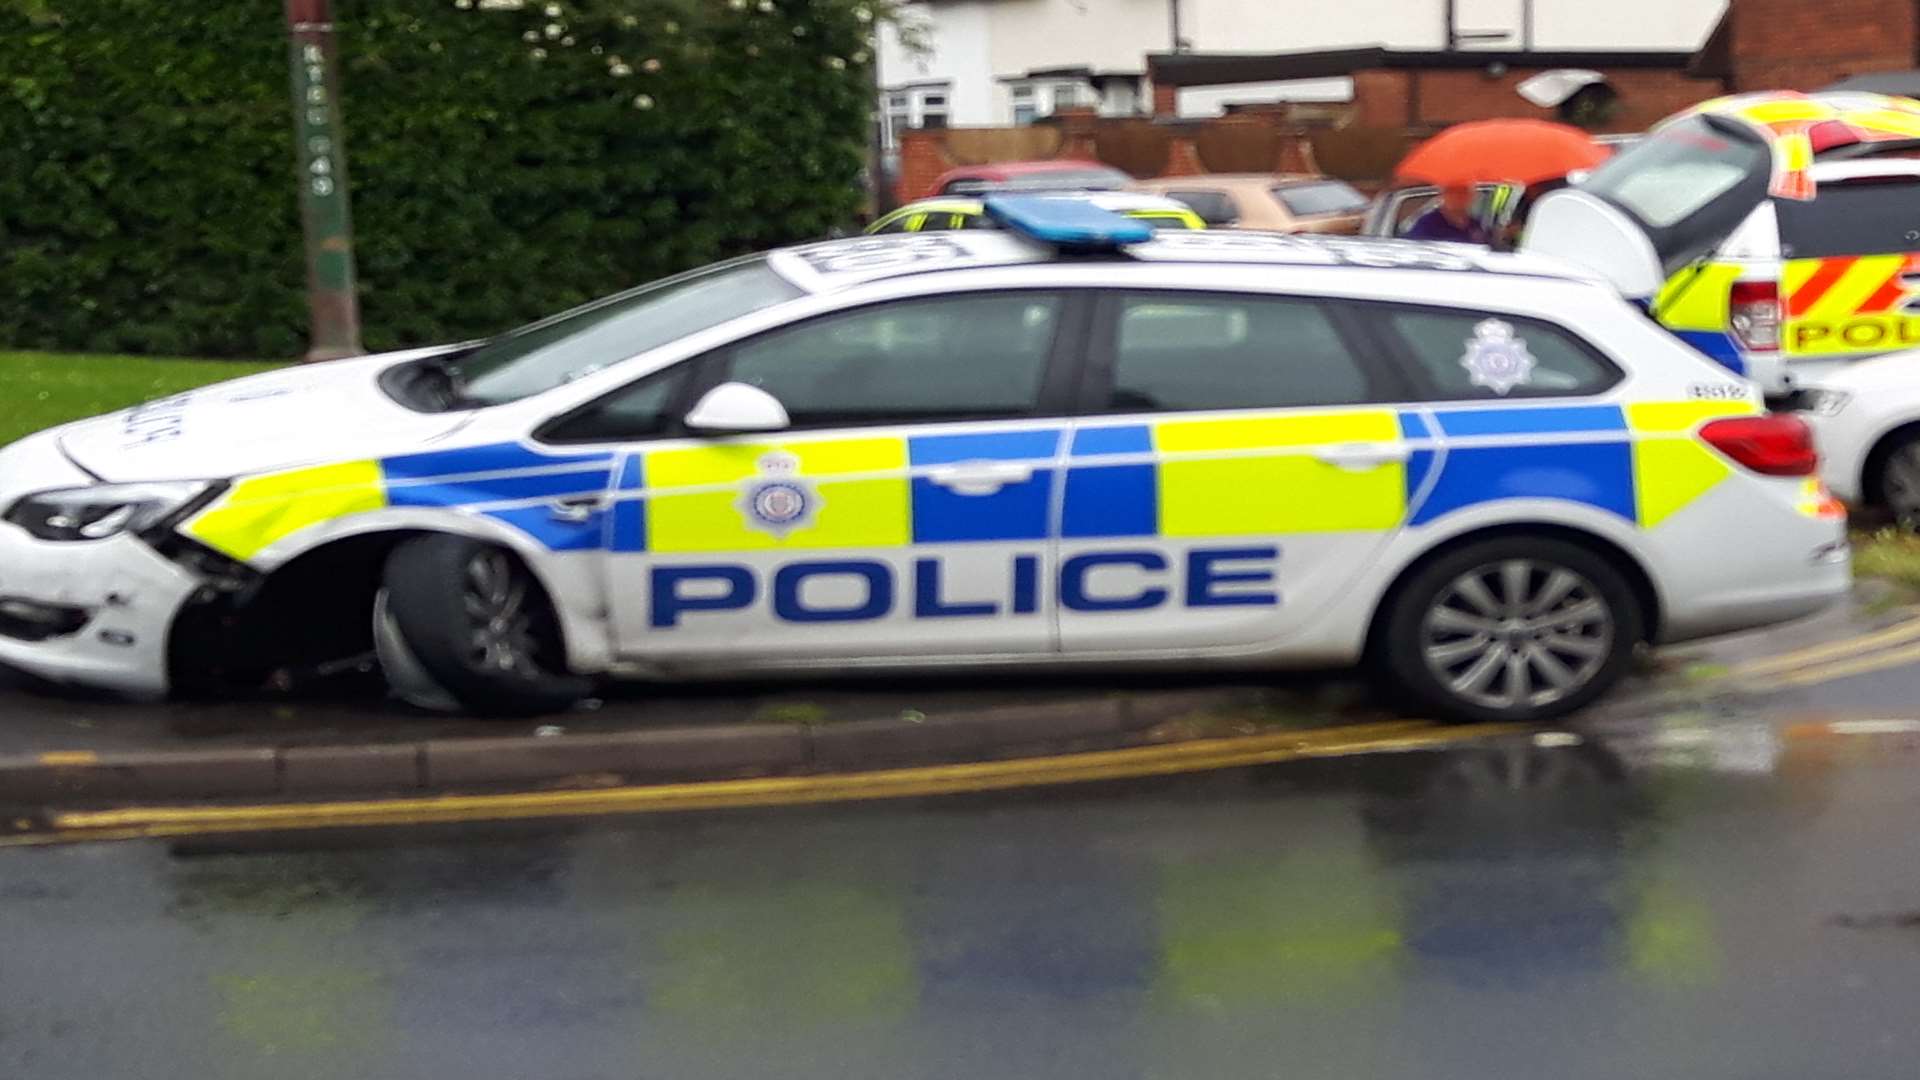 The front of the BTP car was damaged in the crash